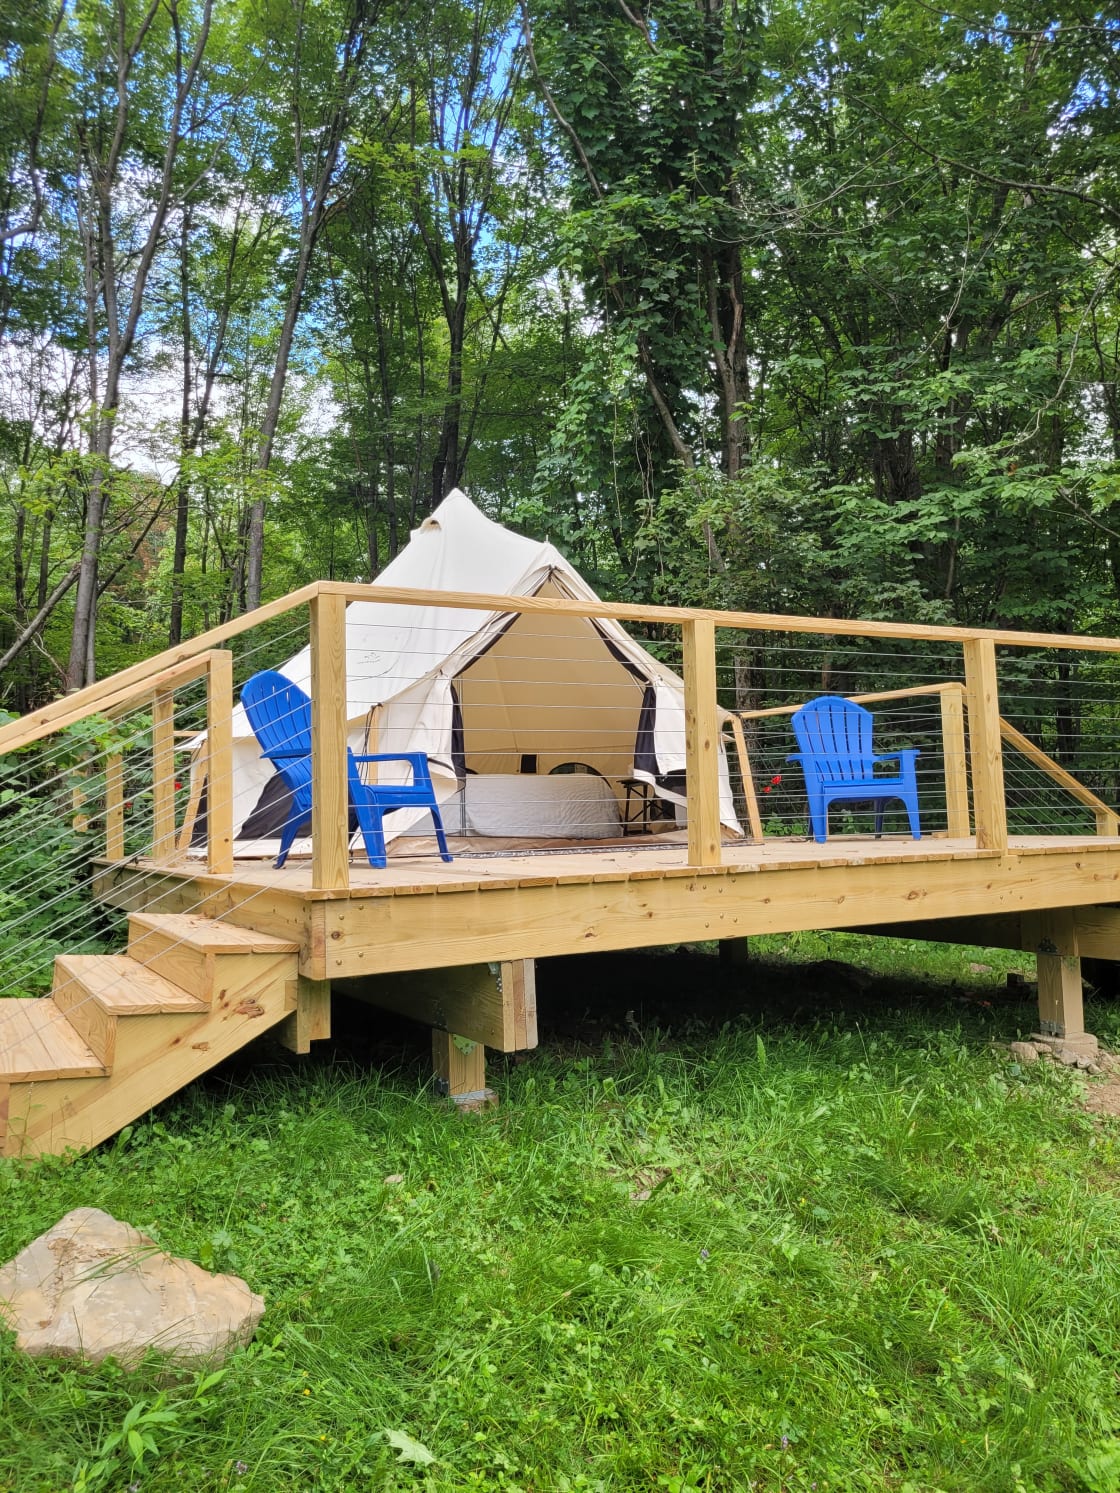 A beautiful platform deck for surveying the woods, pond, and sky around the tent.